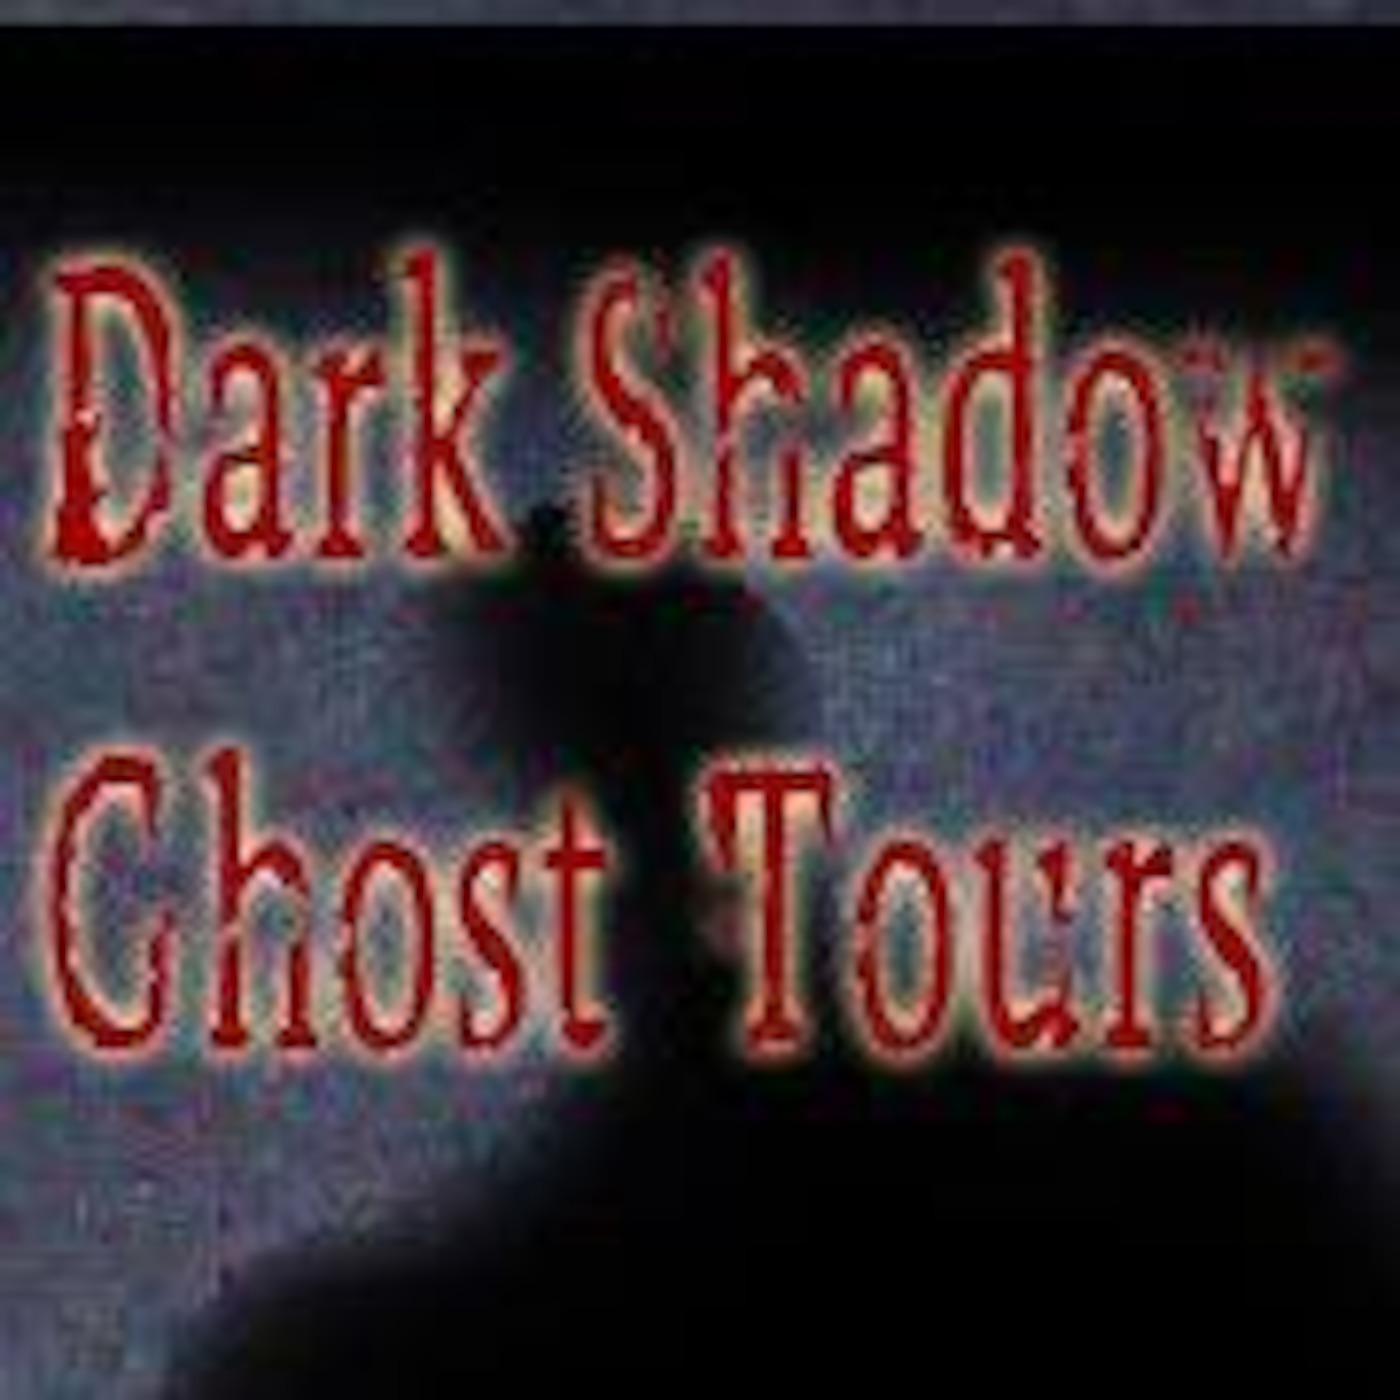 3/19/2017 Shawn and Marianne Donley and Andrea Ruffner of Dark Shadow Ghost Tours.